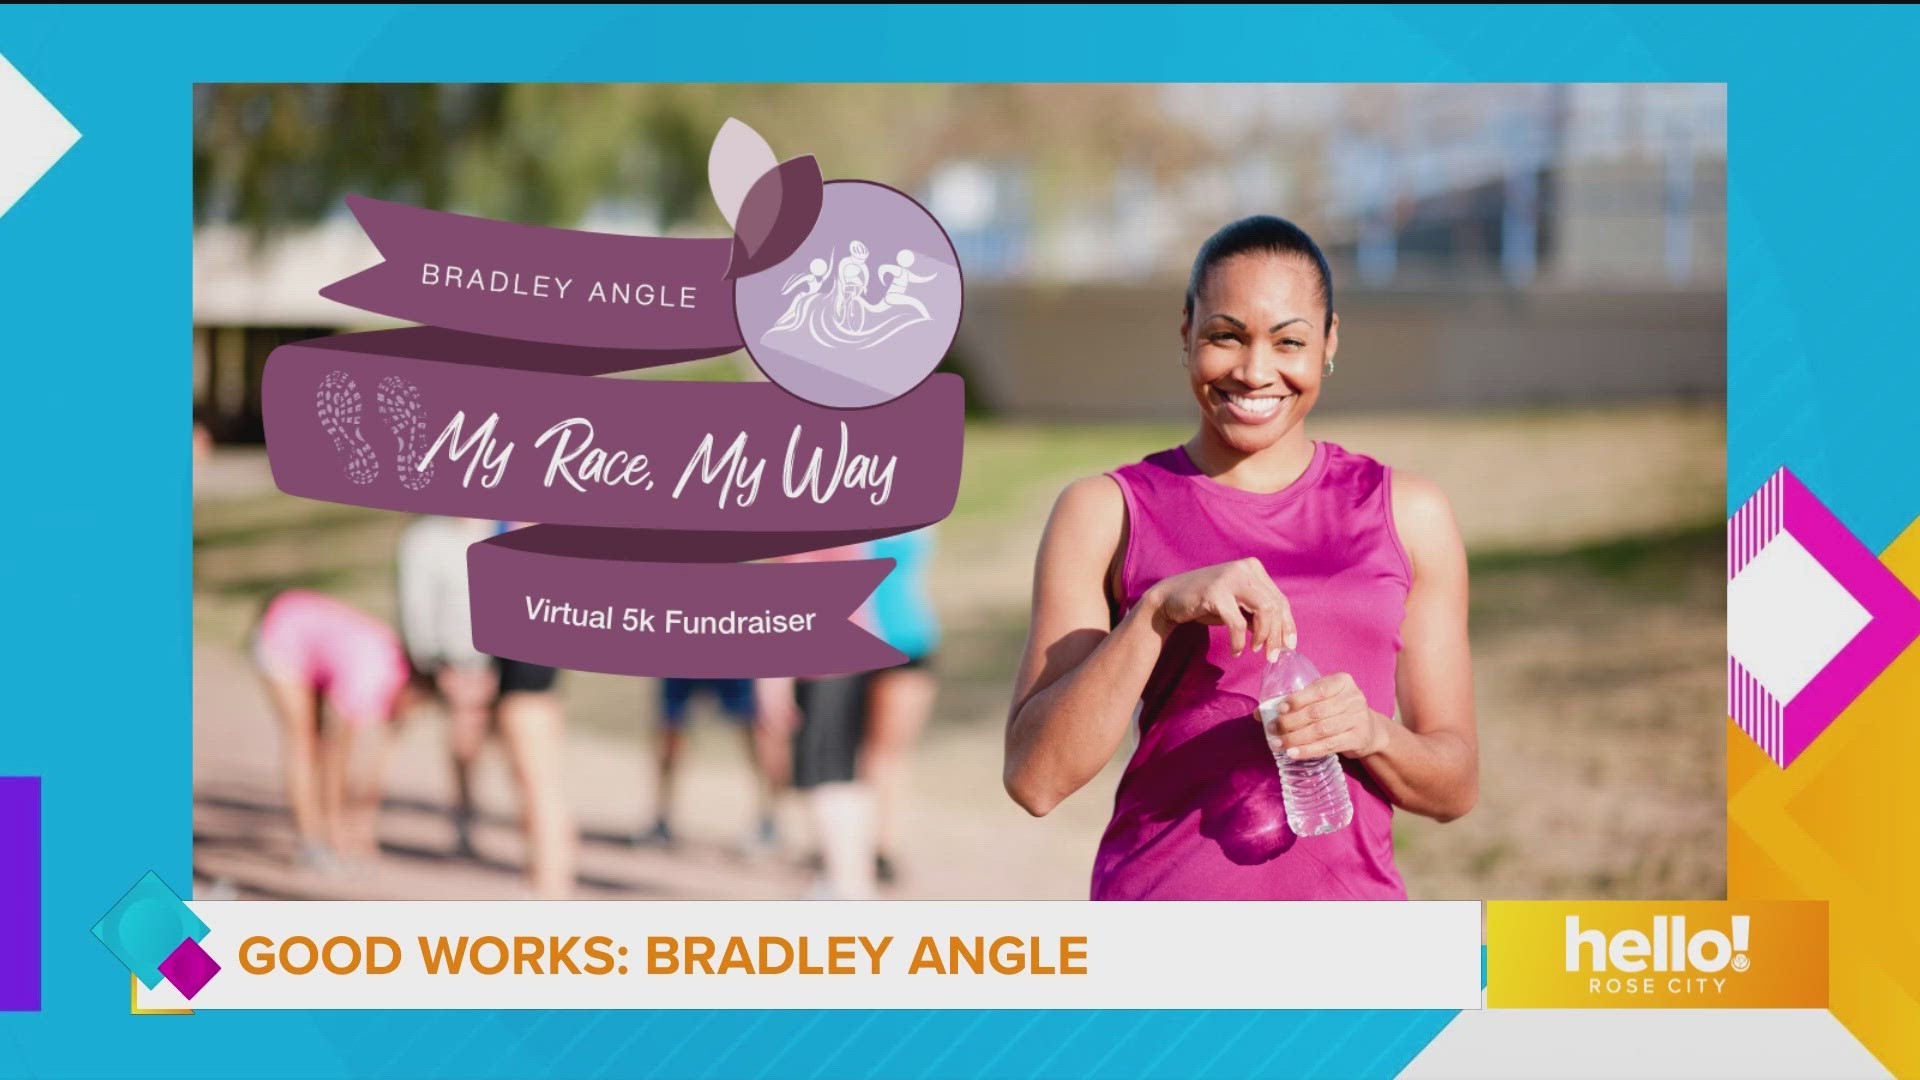 Bradley Angle is holding a virtual 5K to raise money for it's programs